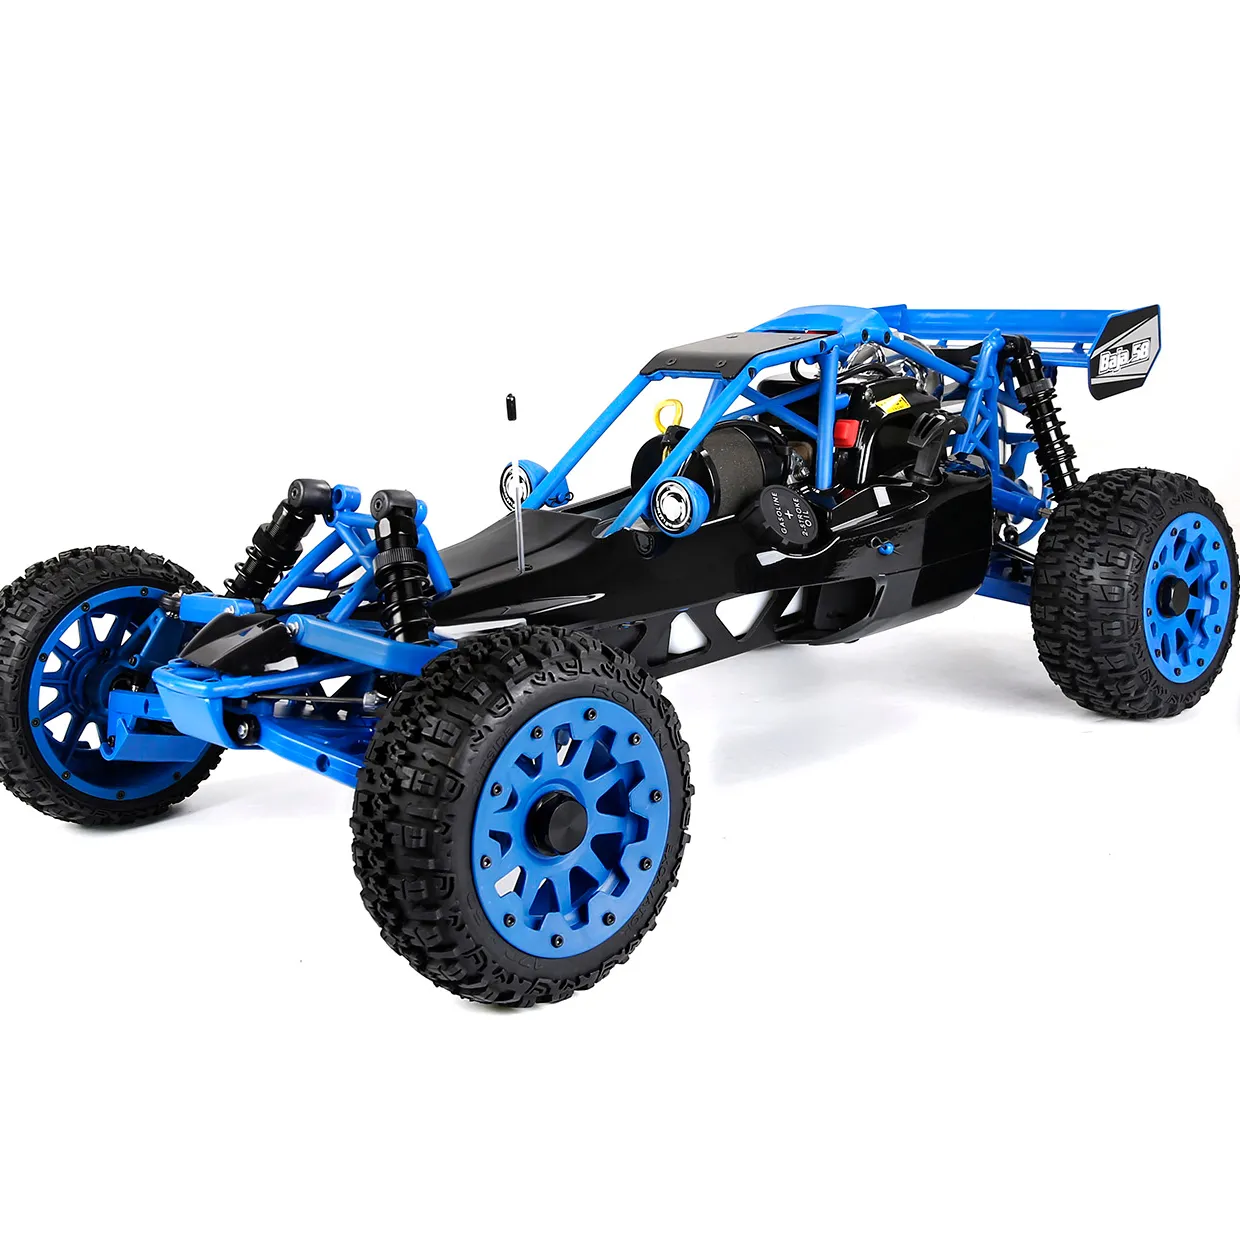 Free Delivery Baha320 Blue Dragon Limited Edition 1 / 5 Ratio <span class=keywords><strong>RC</strong></span> Car High Quality 2021 Hot Toy Car